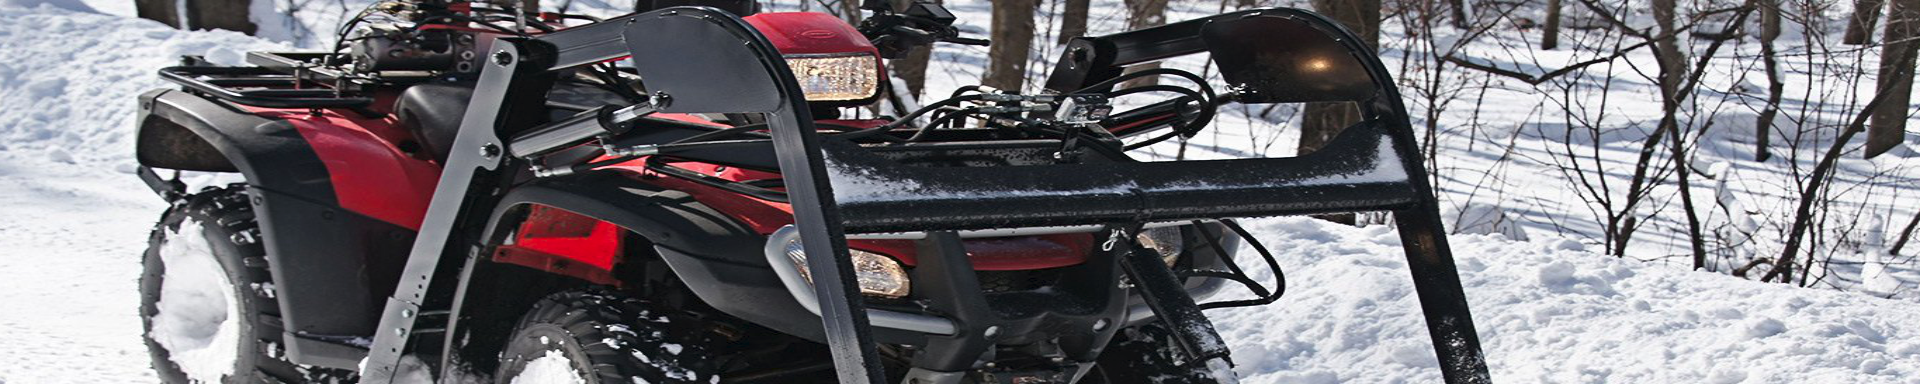 Lift Systems | MunroPowersports.com | Munro Industries mp-100803010803